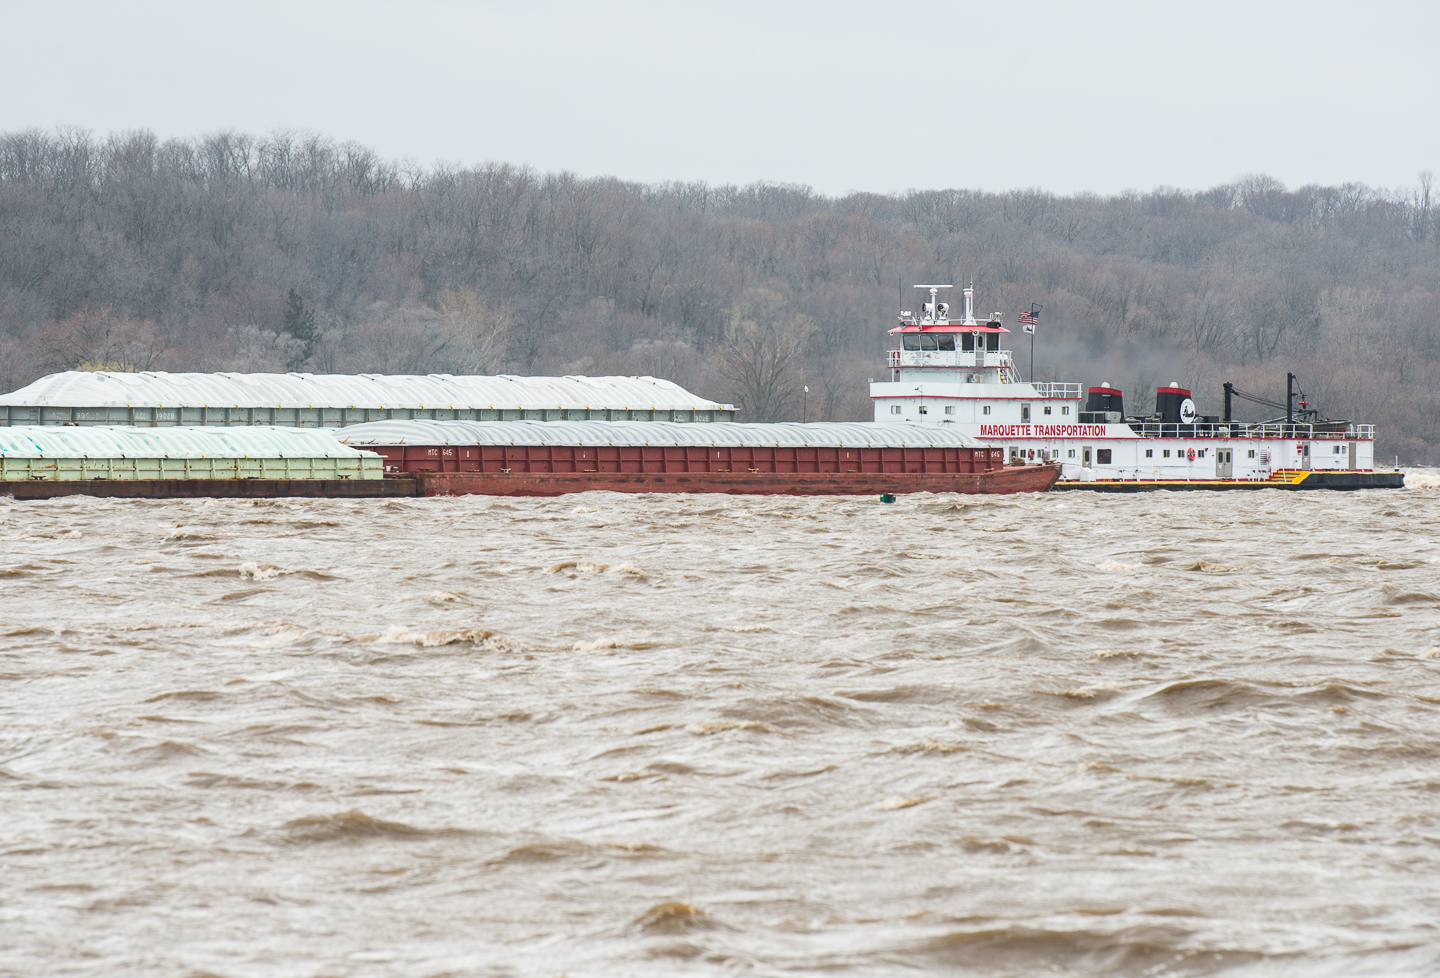 A barge travels down the Mississippi River.